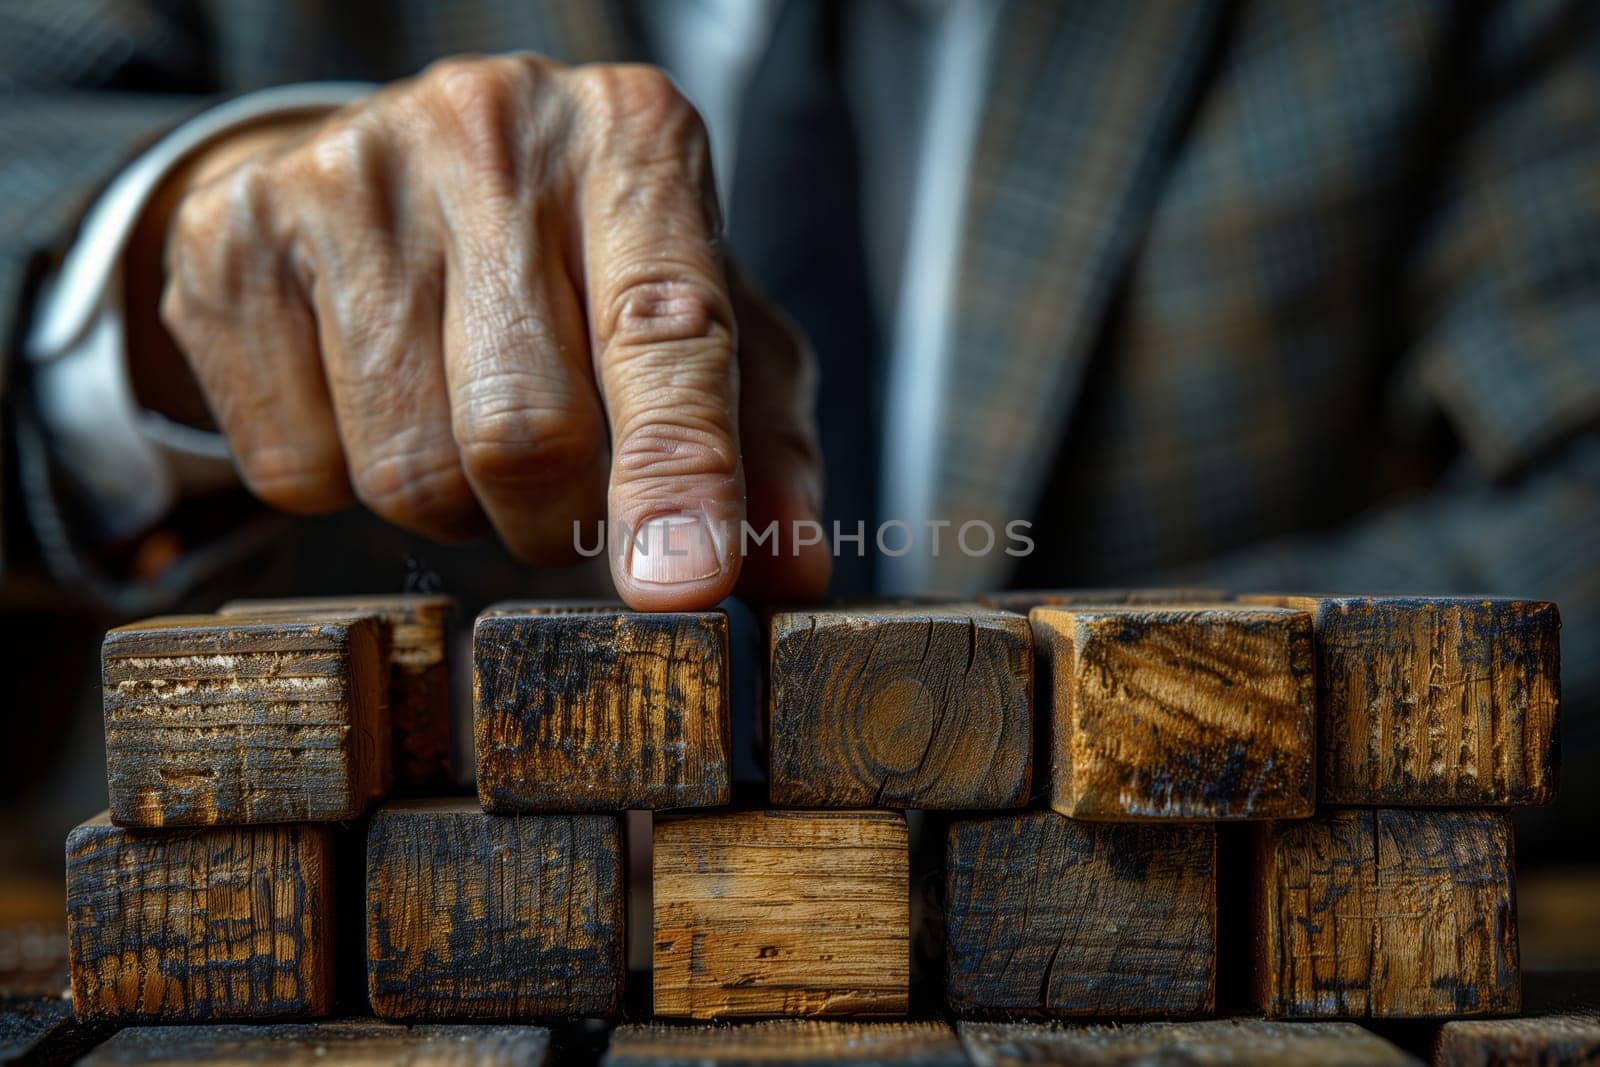 A man in a tailored suit carefully stacks hardwood blocks on top of each other, creating a mesmerizing gesture akin to building a miniature wooden skyscraper